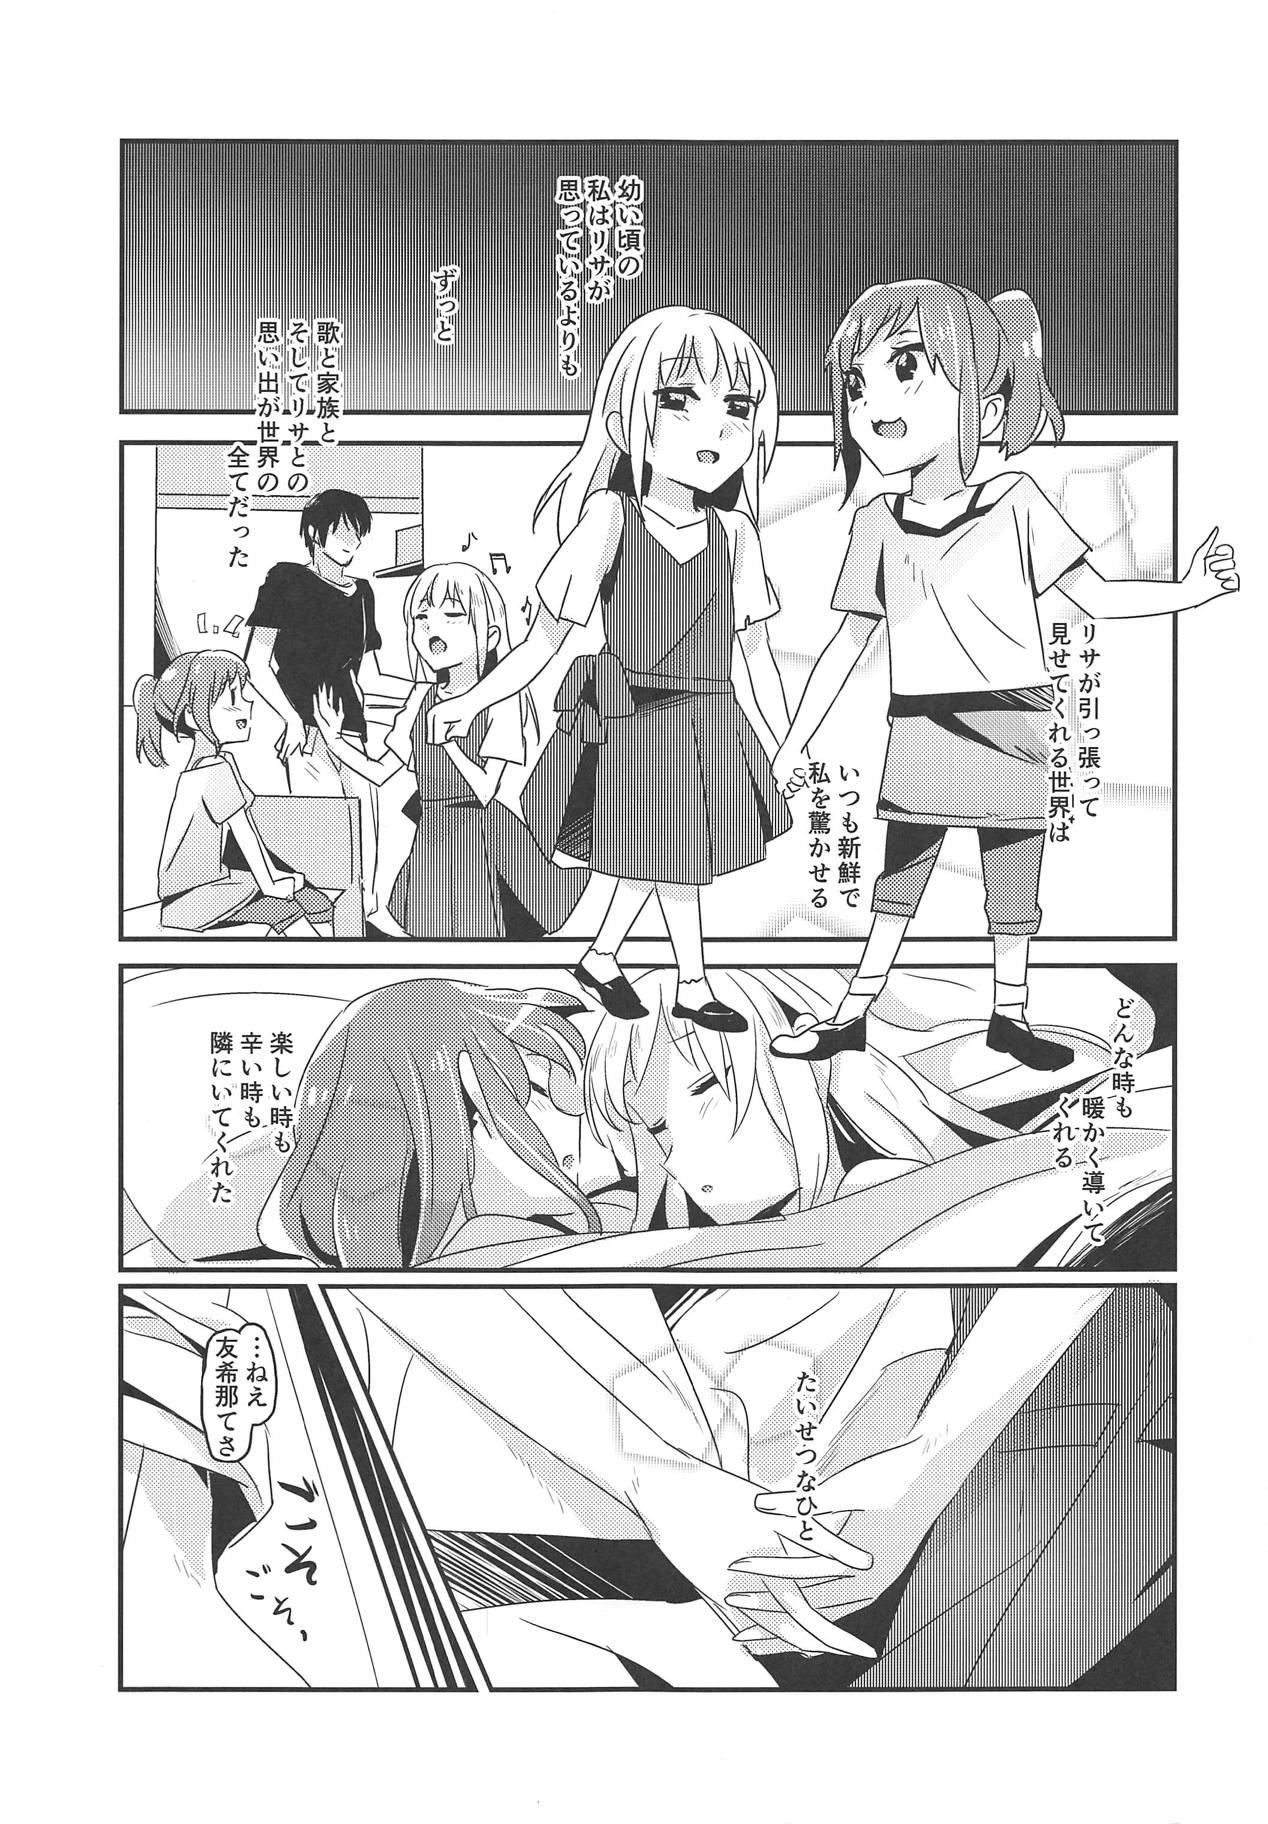 Old And Young Serenade - Bang dream Bubblebutt - Page 2